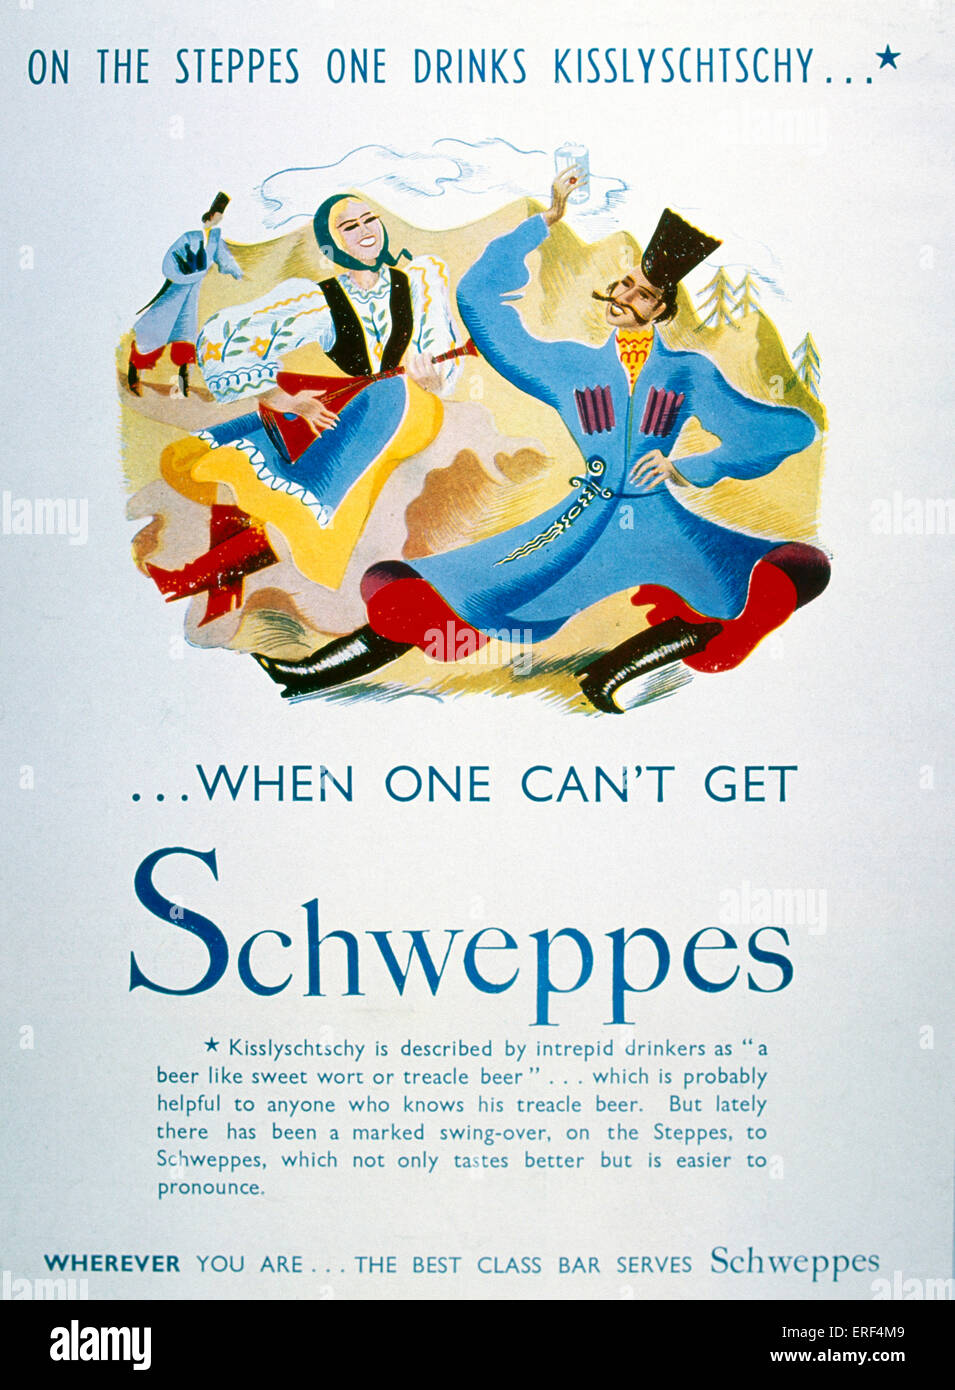 Russian cossack dancers in Schweppes advertisement. Woman playing BALALAIKA Stock Photo